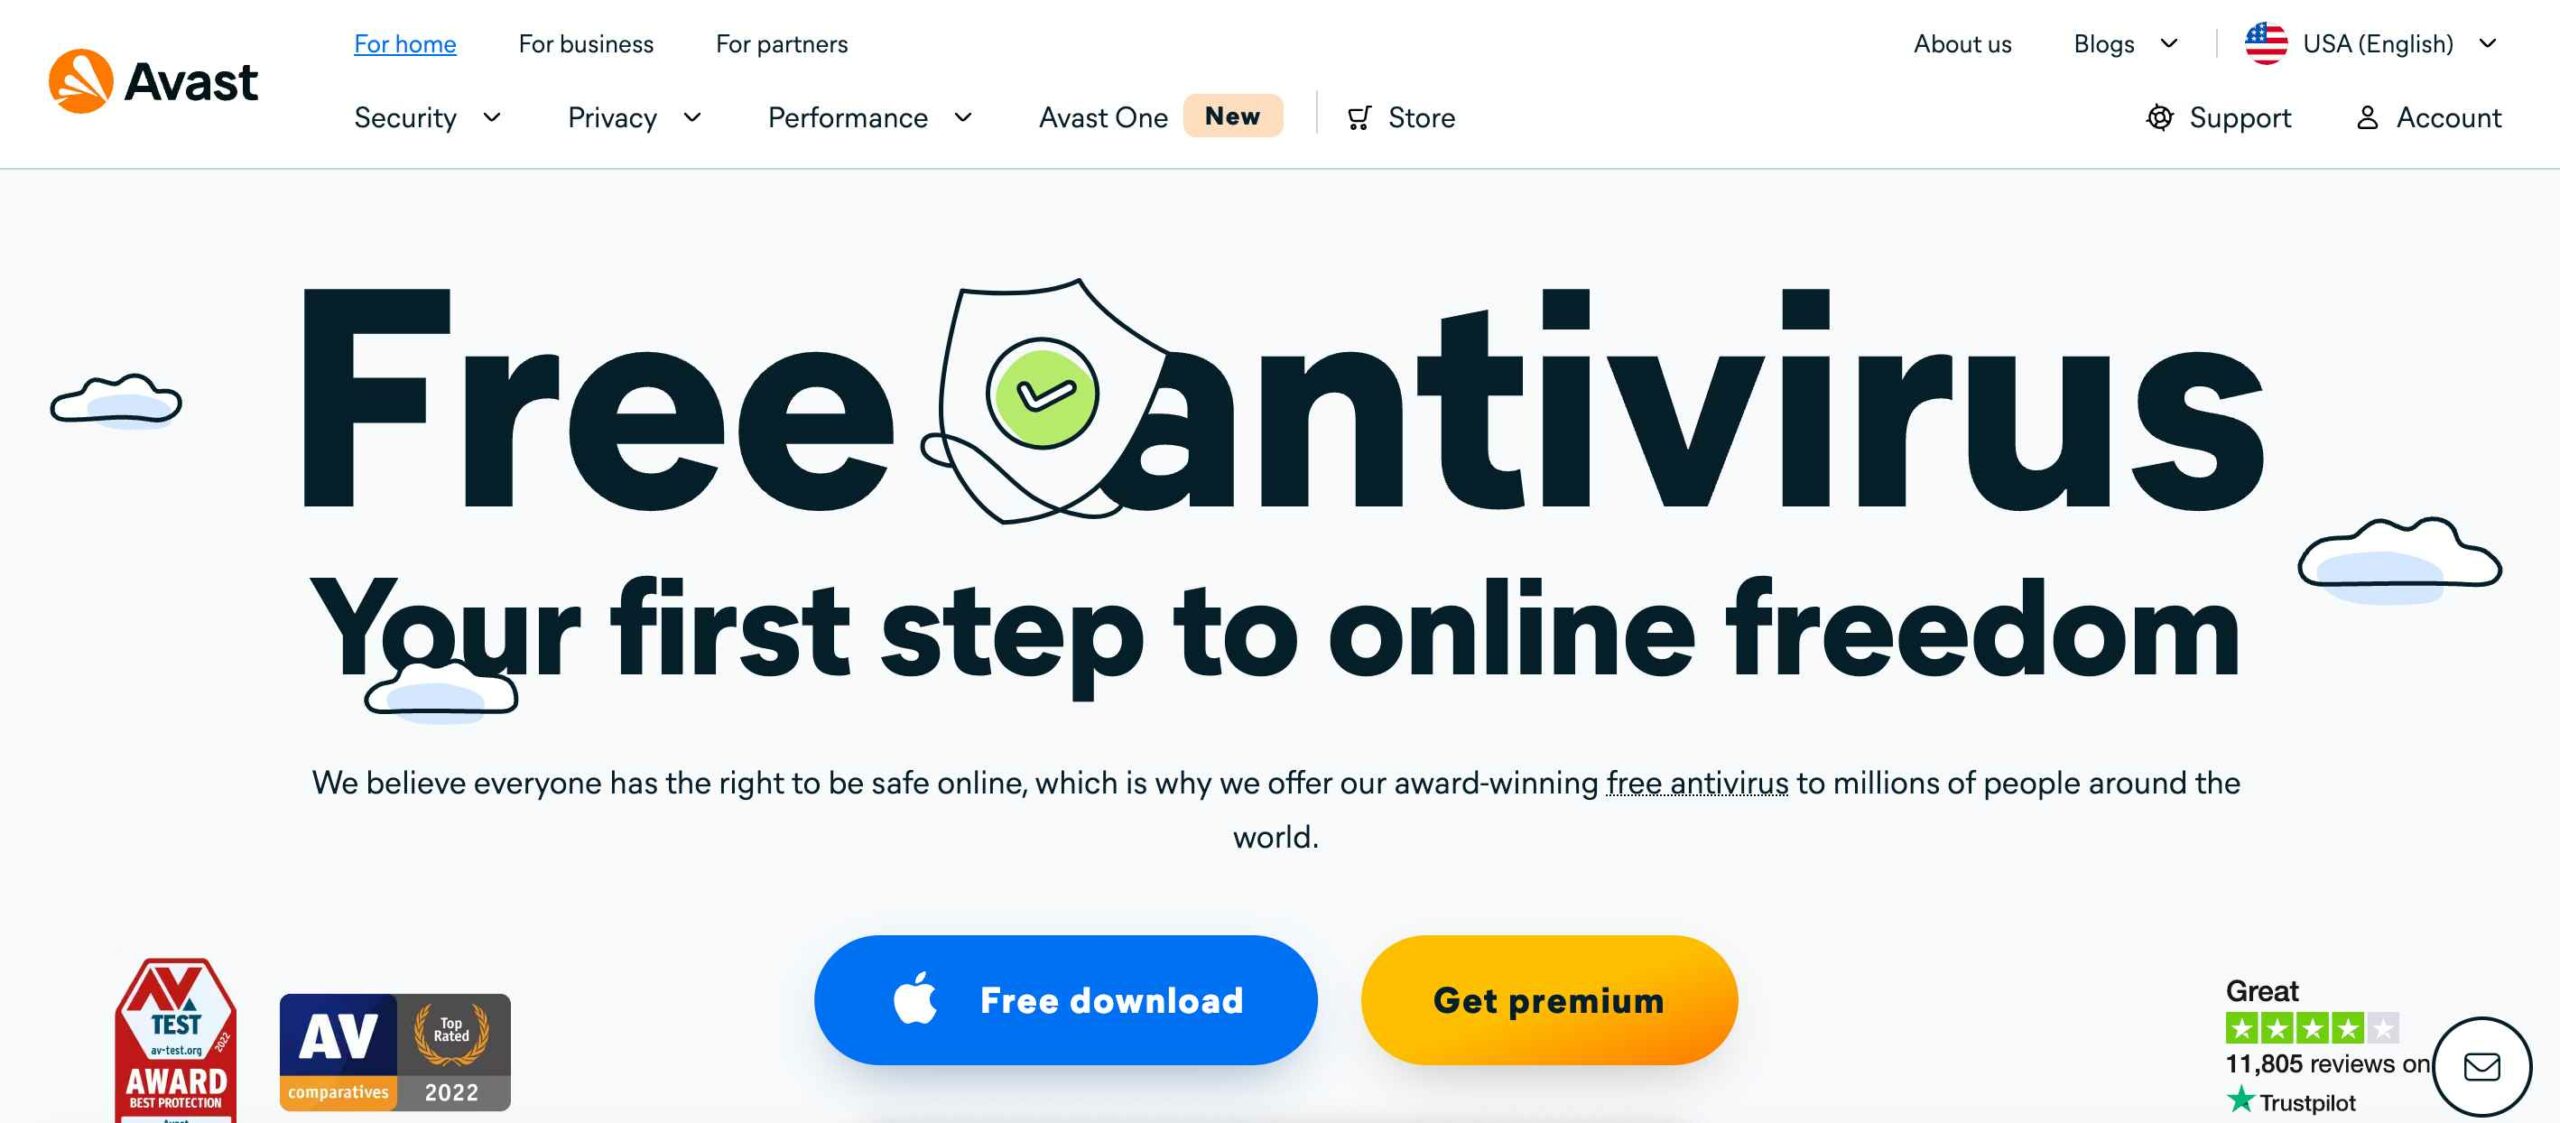 Go To The Ofiicial Website Of Avast